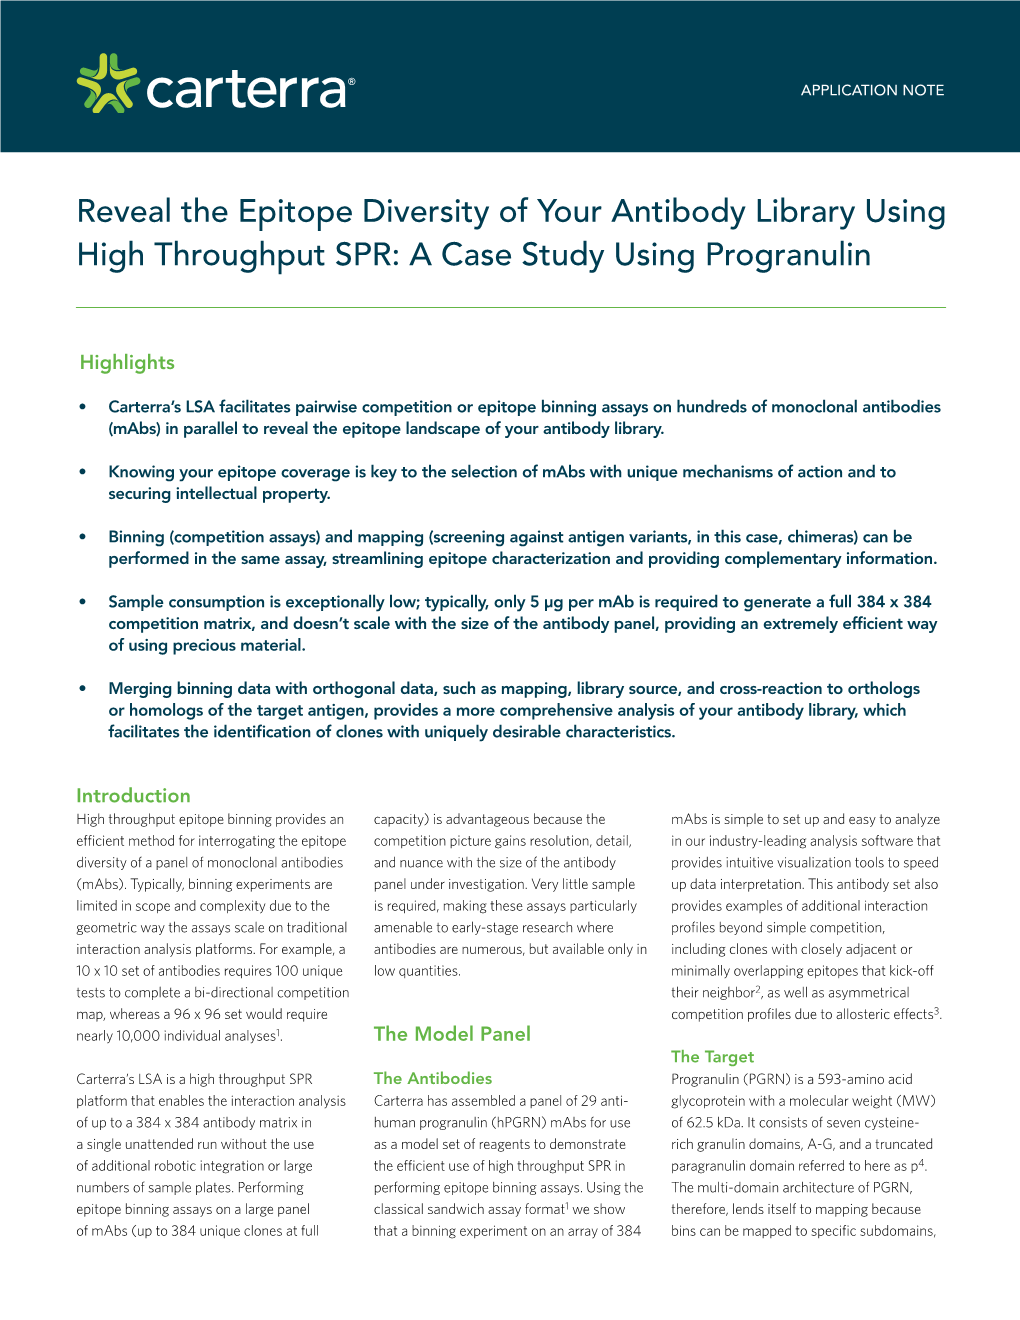 Application Note: Reveal the Epitope Diversity of Your Antibody